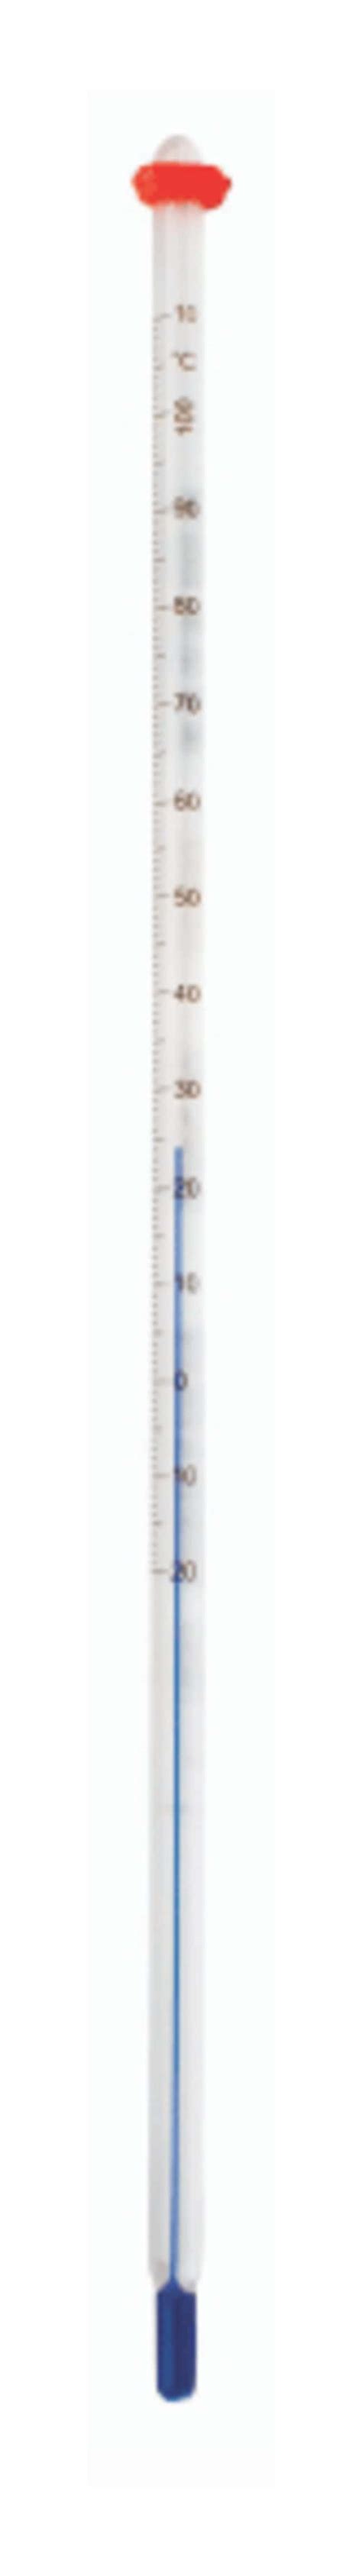 Fisherbrandgeneral Purpose Liquid In Glass Total Immersion Thermometers